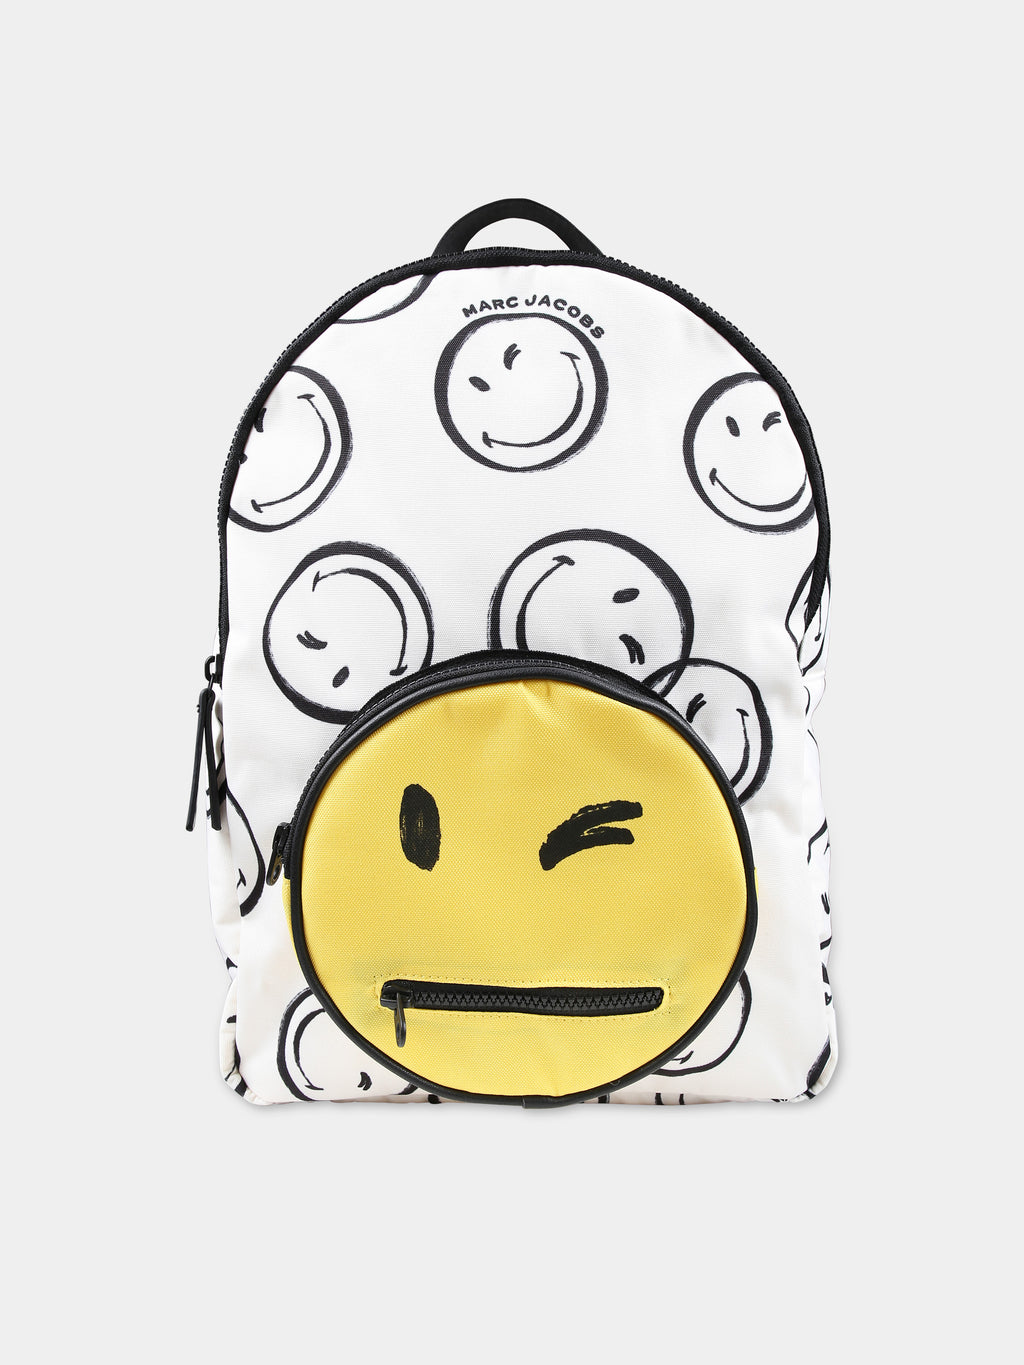 Ivory backpack for kids with yellow smiley